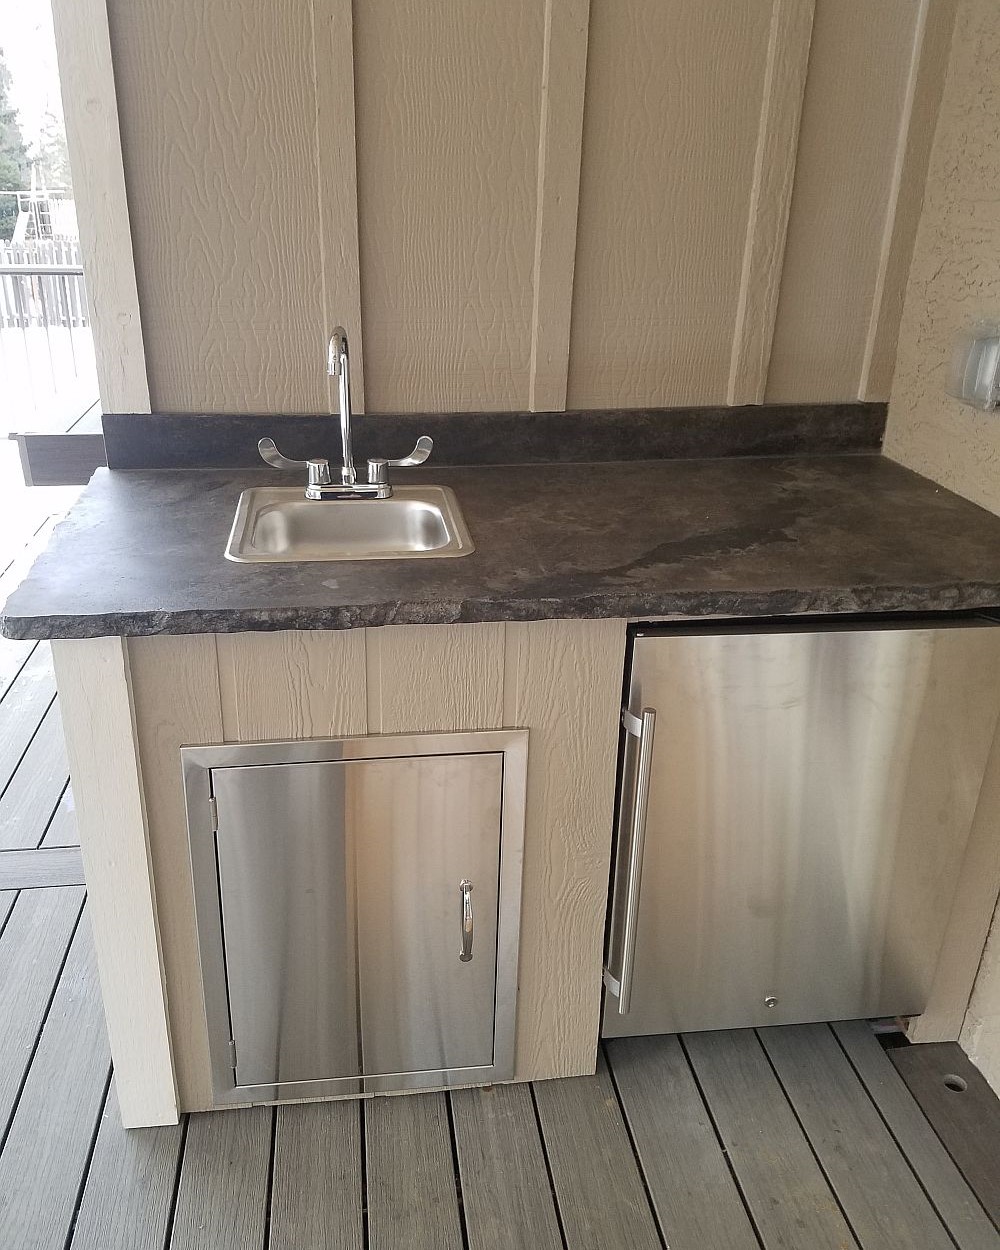 Full-use sink and mini refrigerator are installed on a composite deck to create an outdoor kitchen.